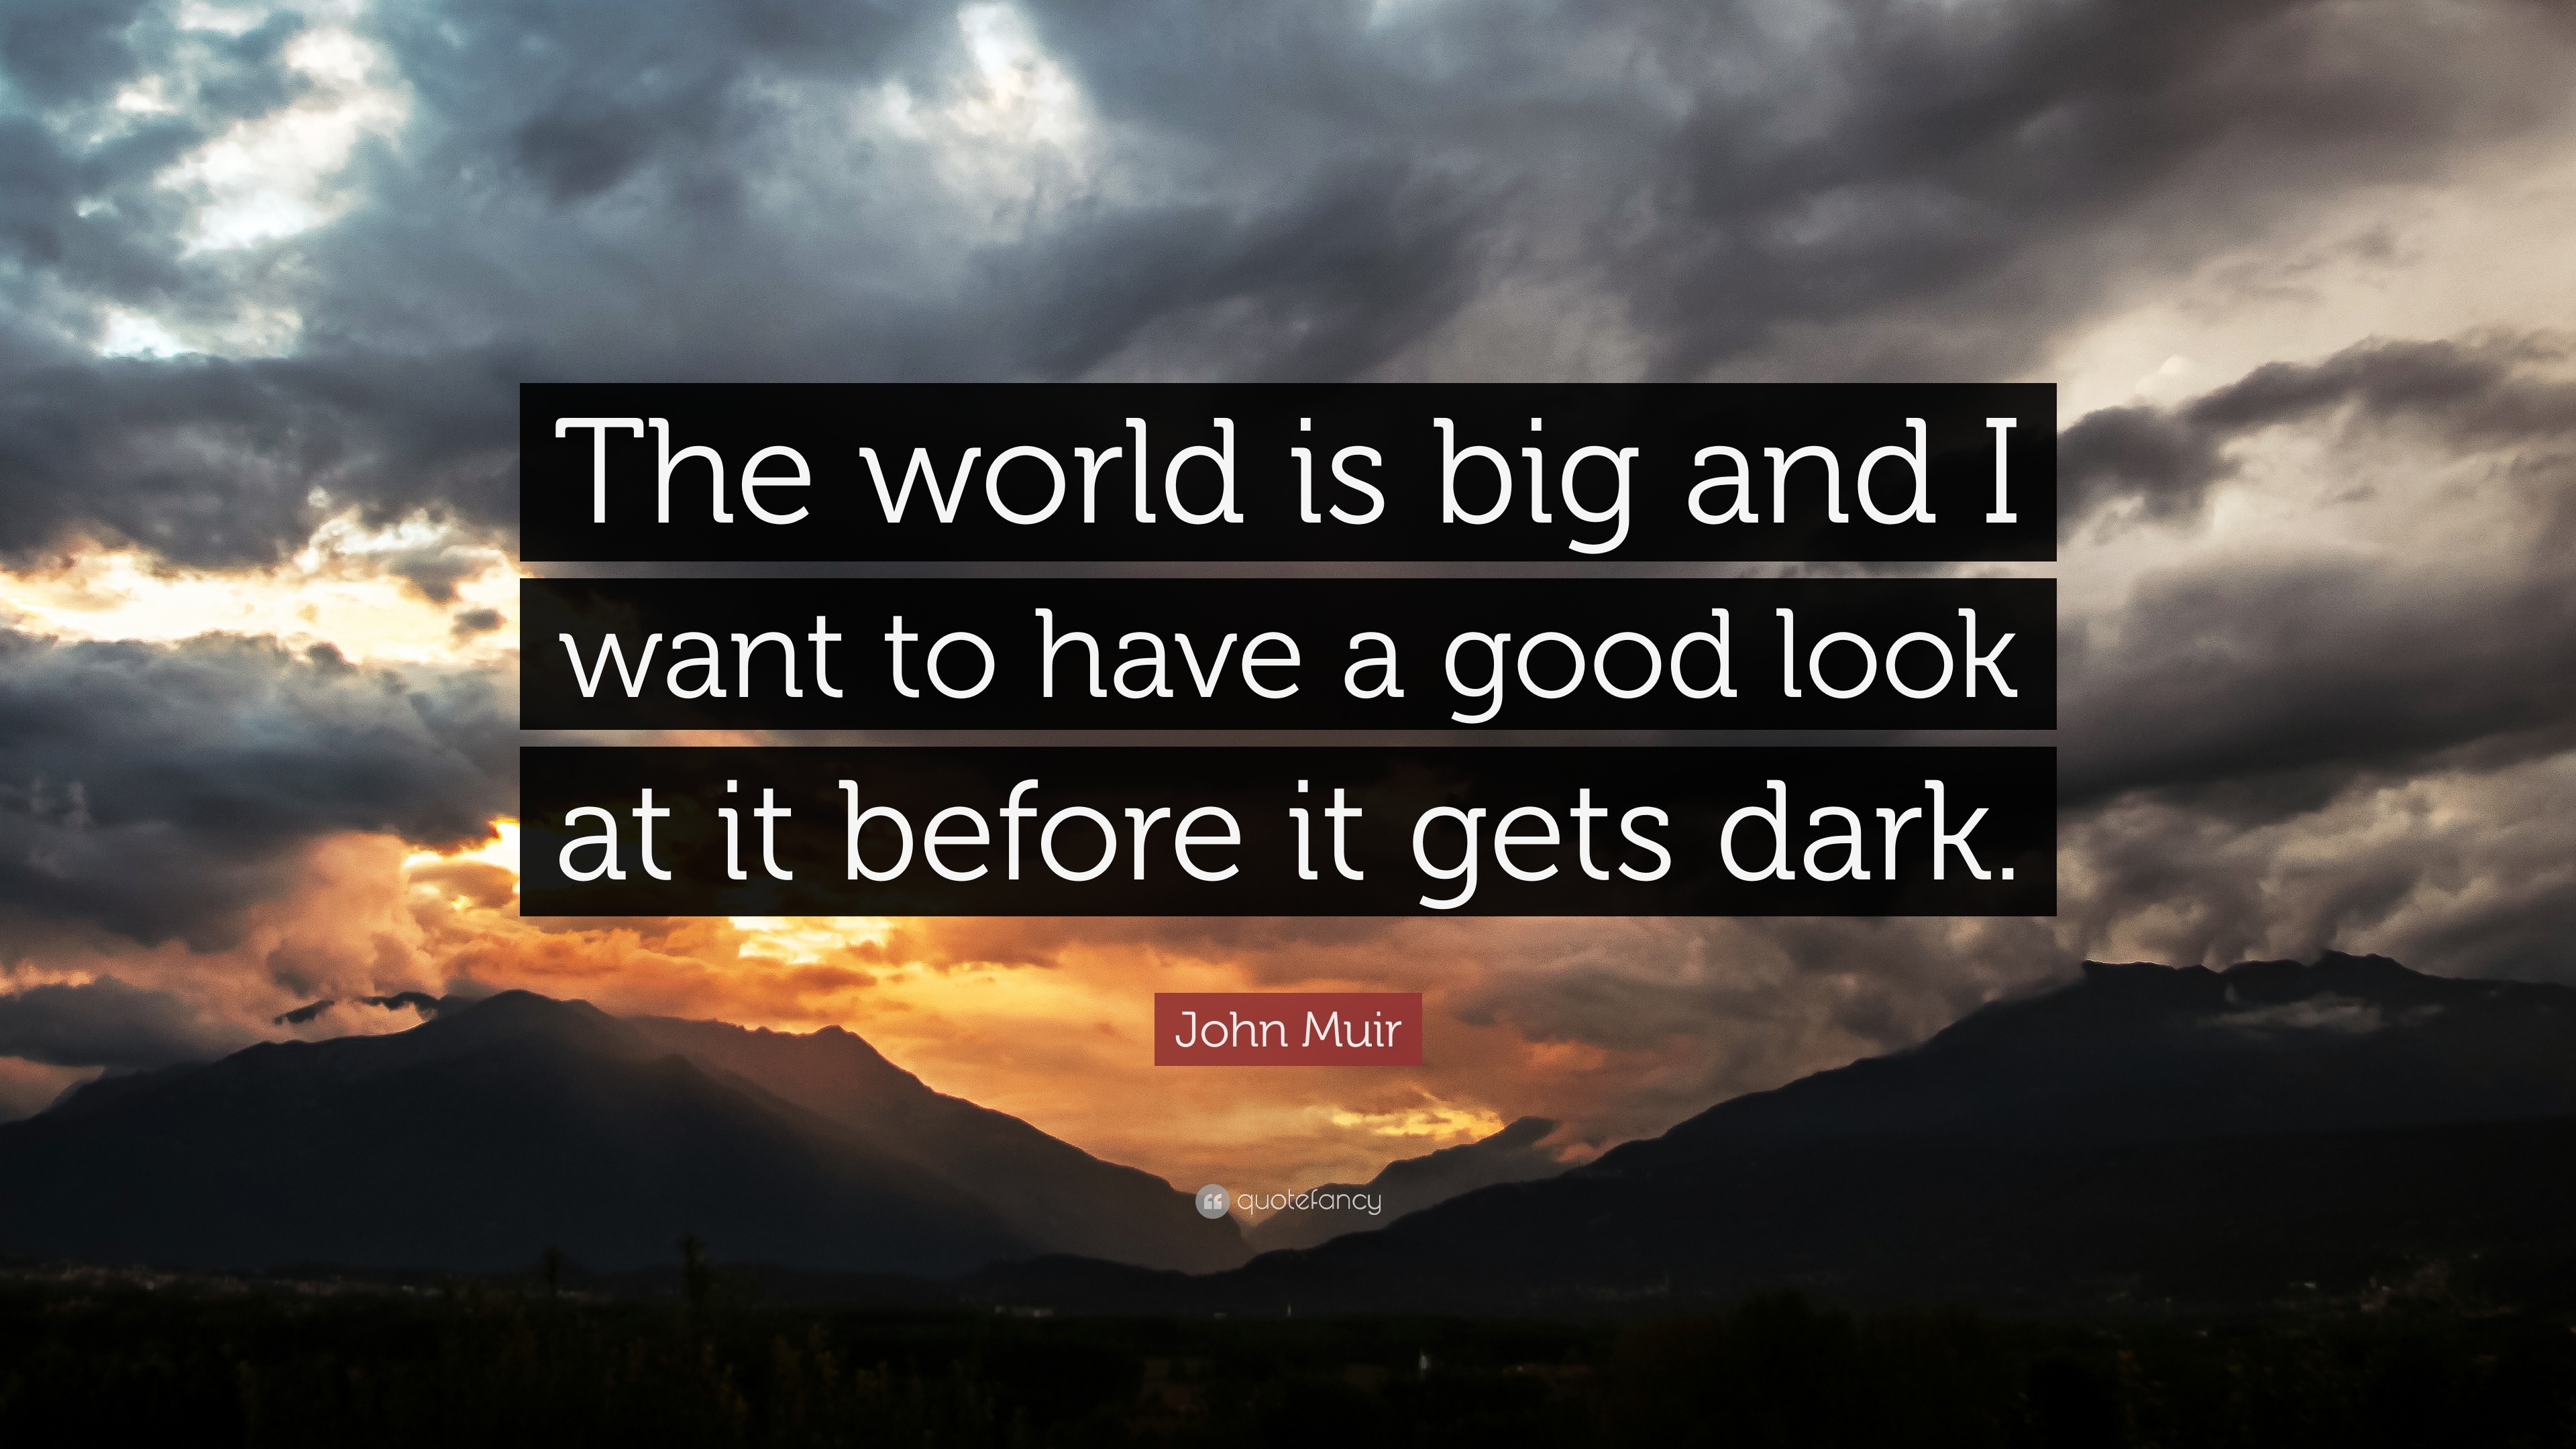 9017 John Muir Quote The world is big and I want to have a good look at